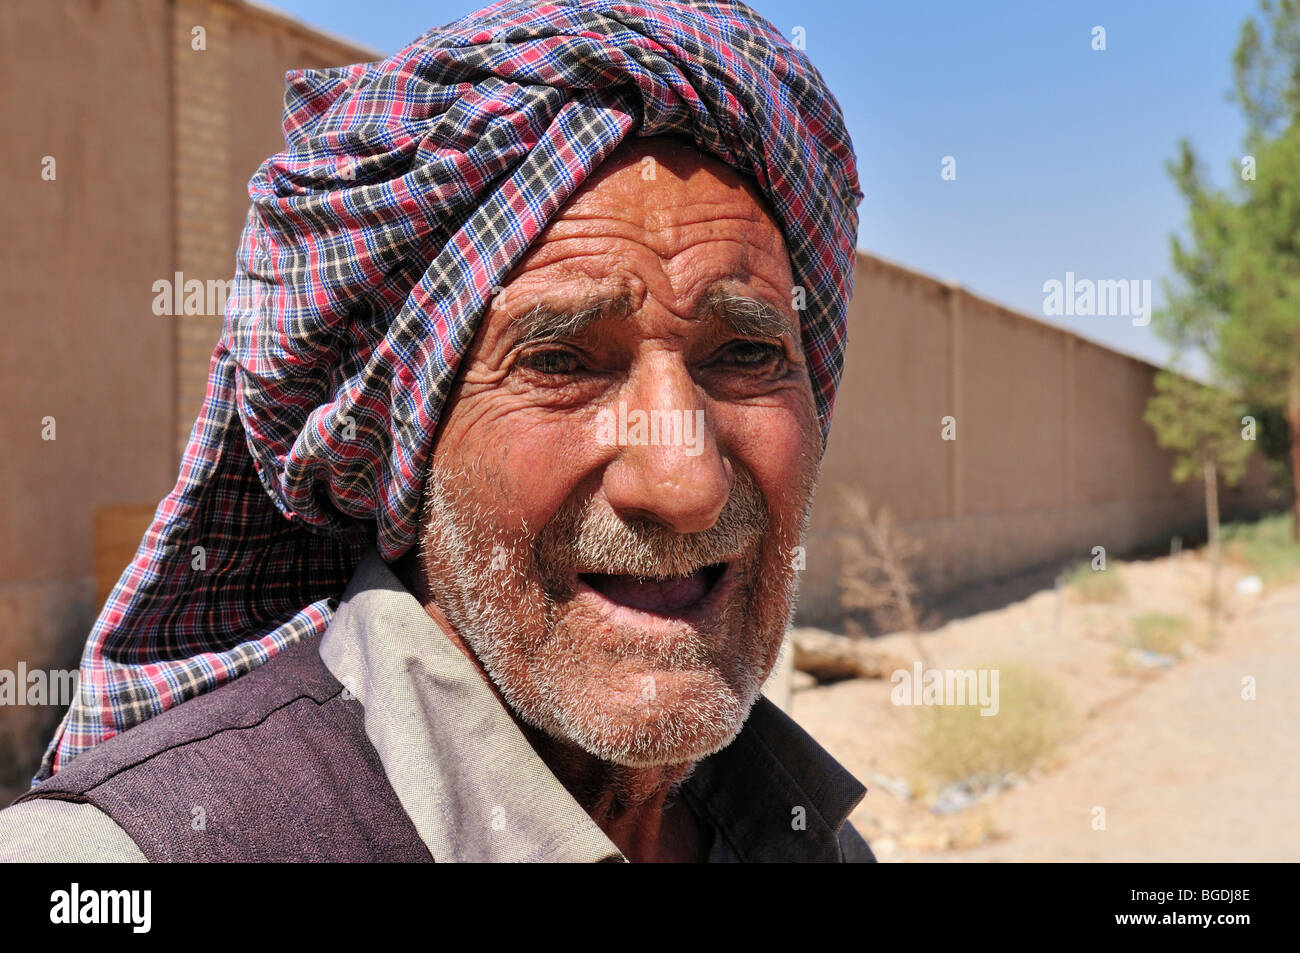 Old Iranian man in the historic town of Yazd, UNESCO World Heritage Site, Iran, Persia, Asia Stock Photo